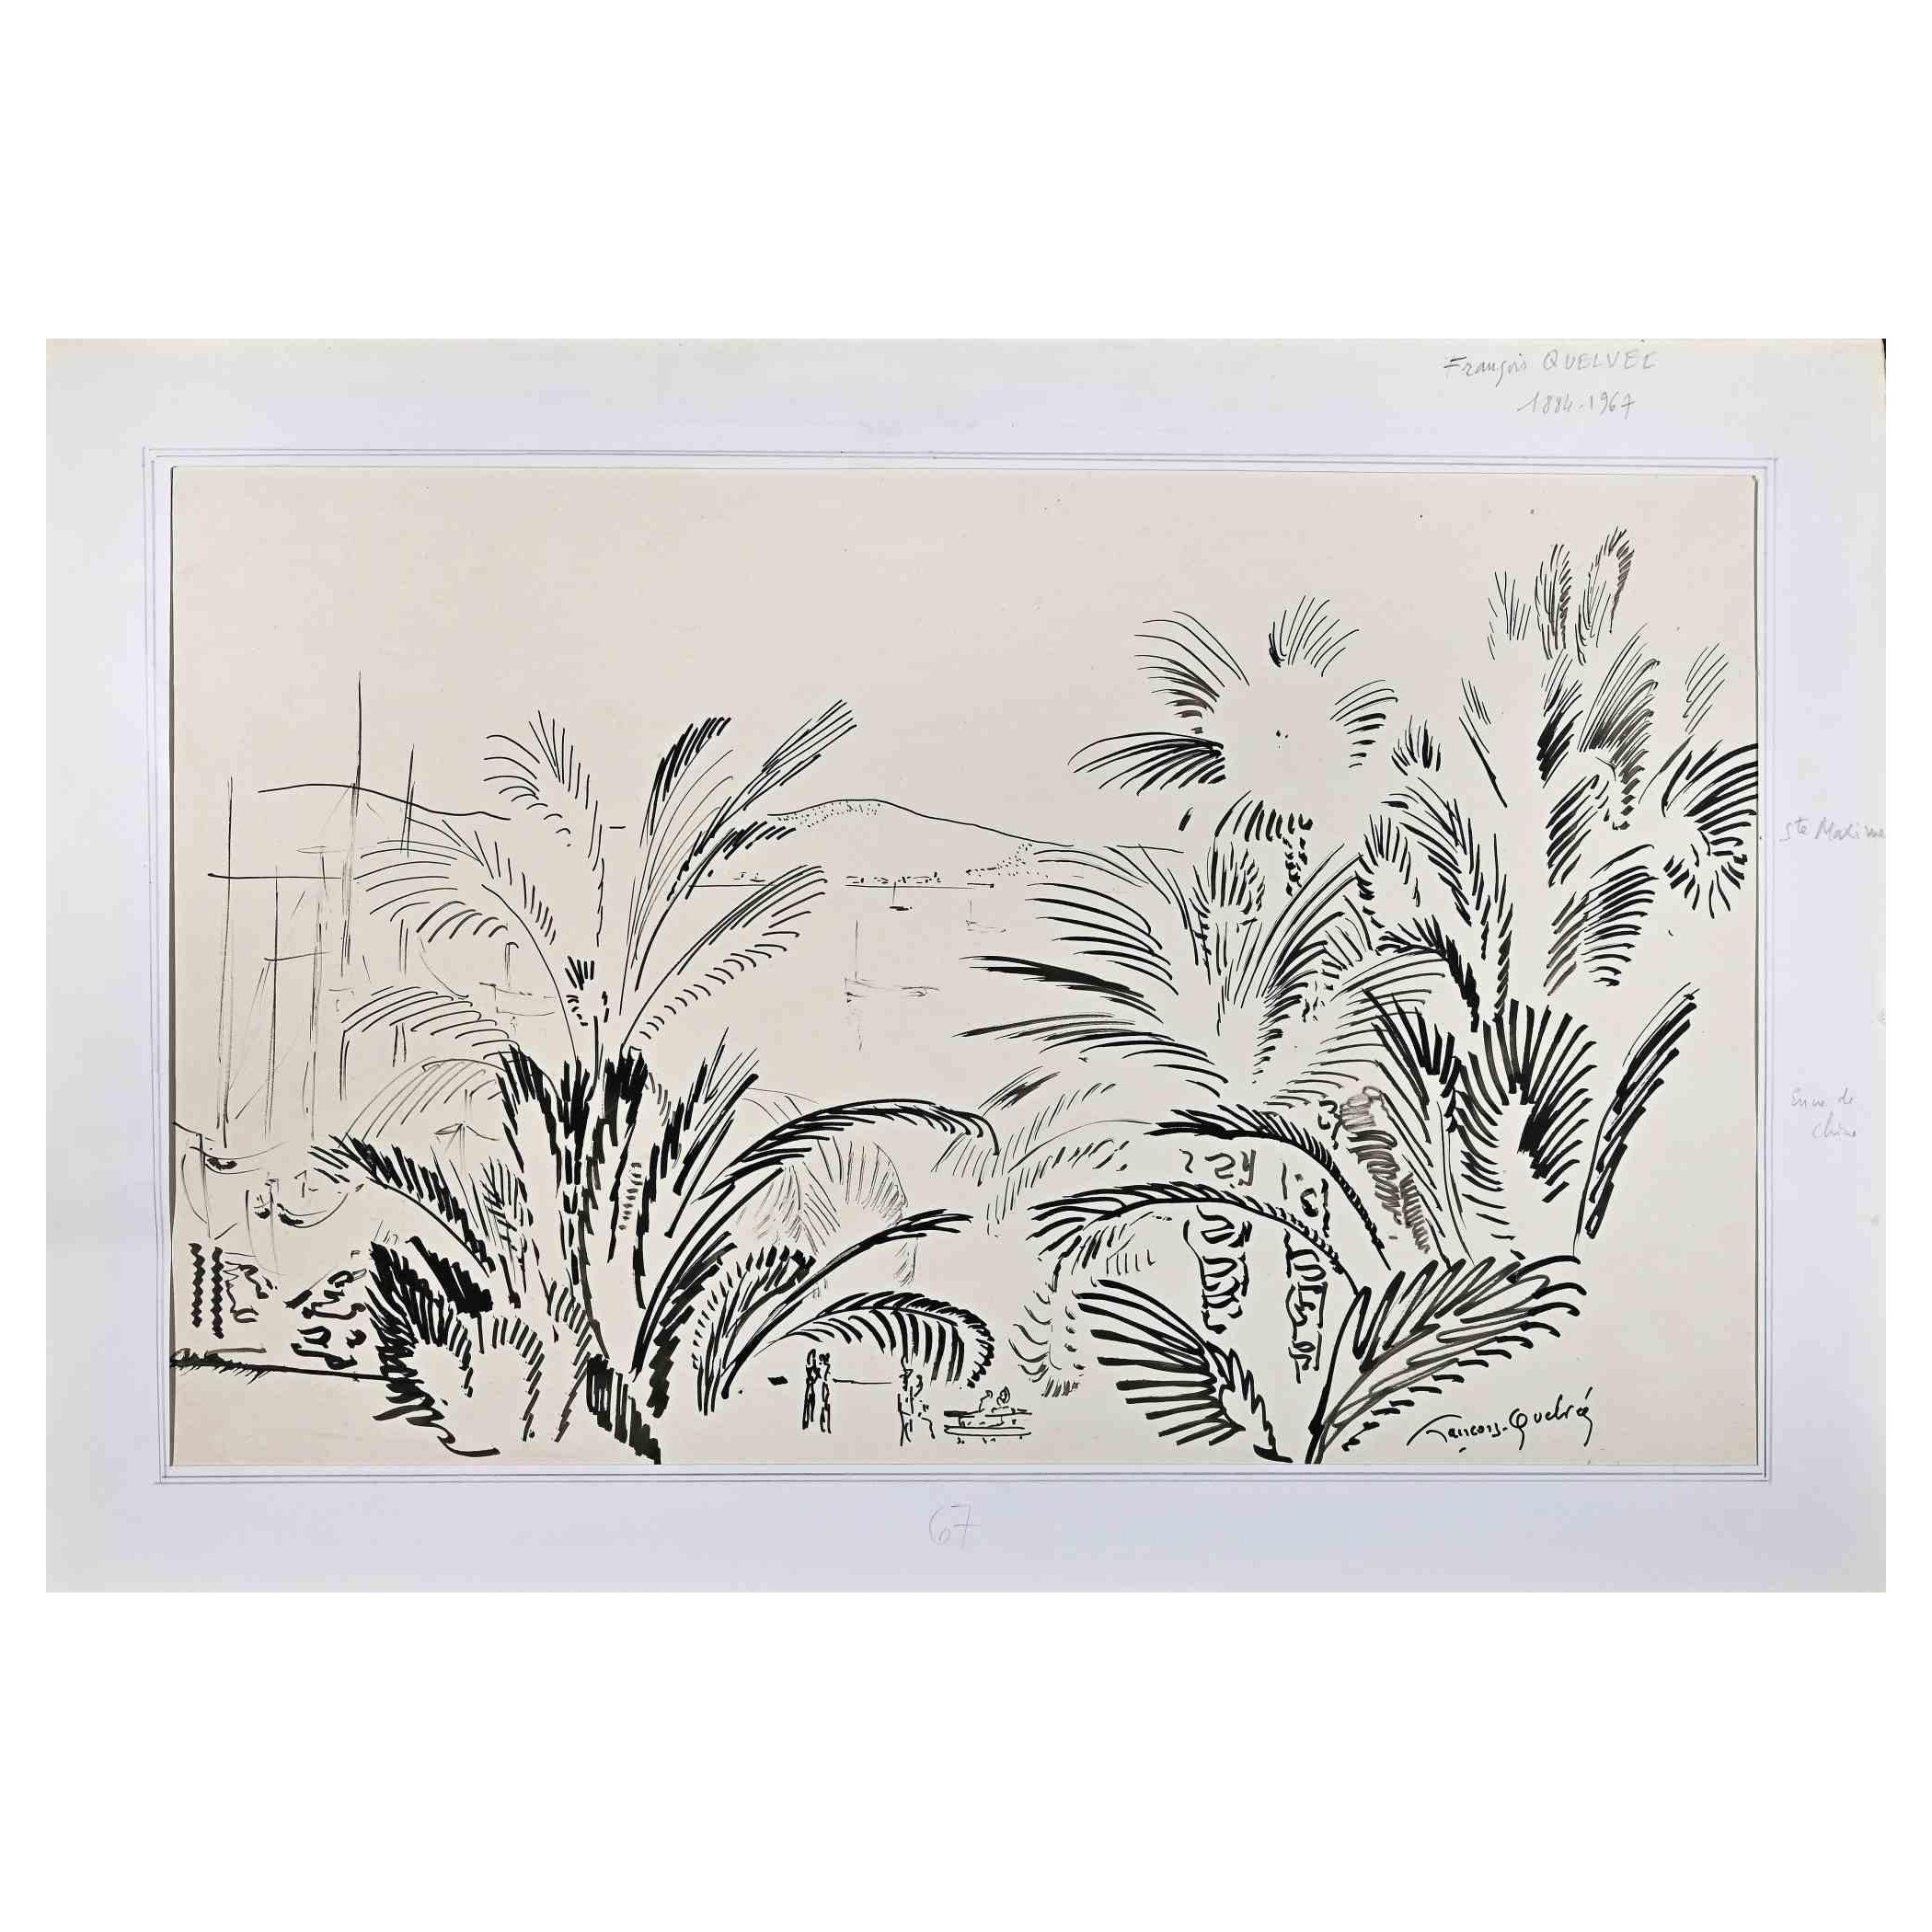 Landscape si a China Ink Drawing realized by François Quelvée (1884-1967).

Good condition on a yellowed paper included a white cardboard passpartout (37.5x55 cm).

Hand-signed by the artist on the lower right corner.

François, Albert, Ernest